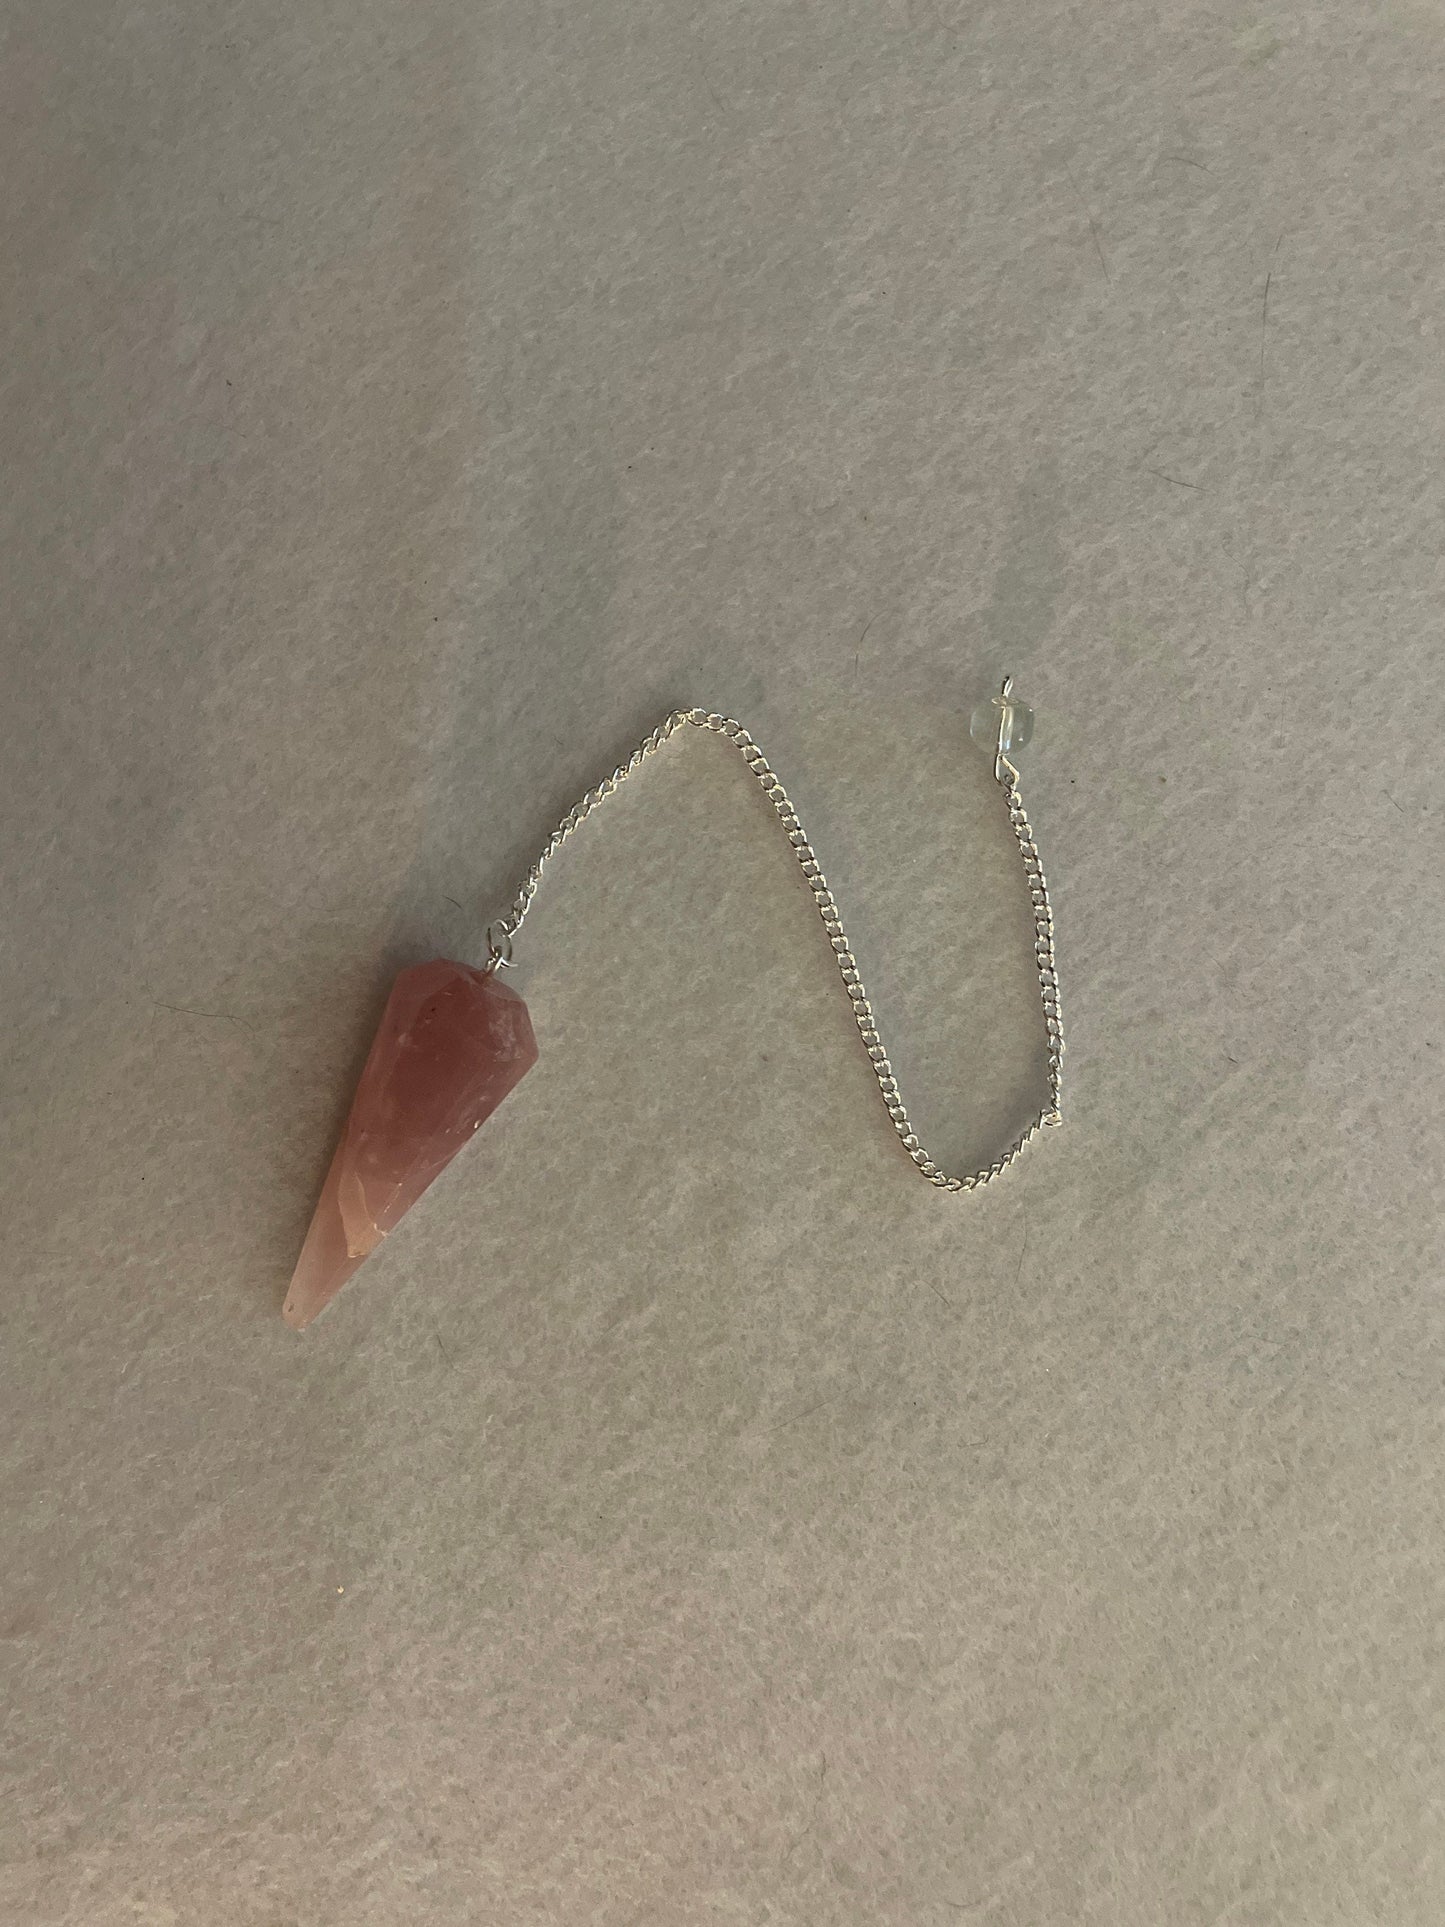 This beautiful Rose Quartz Pendulum is  1.75” and with chain is 8.50”